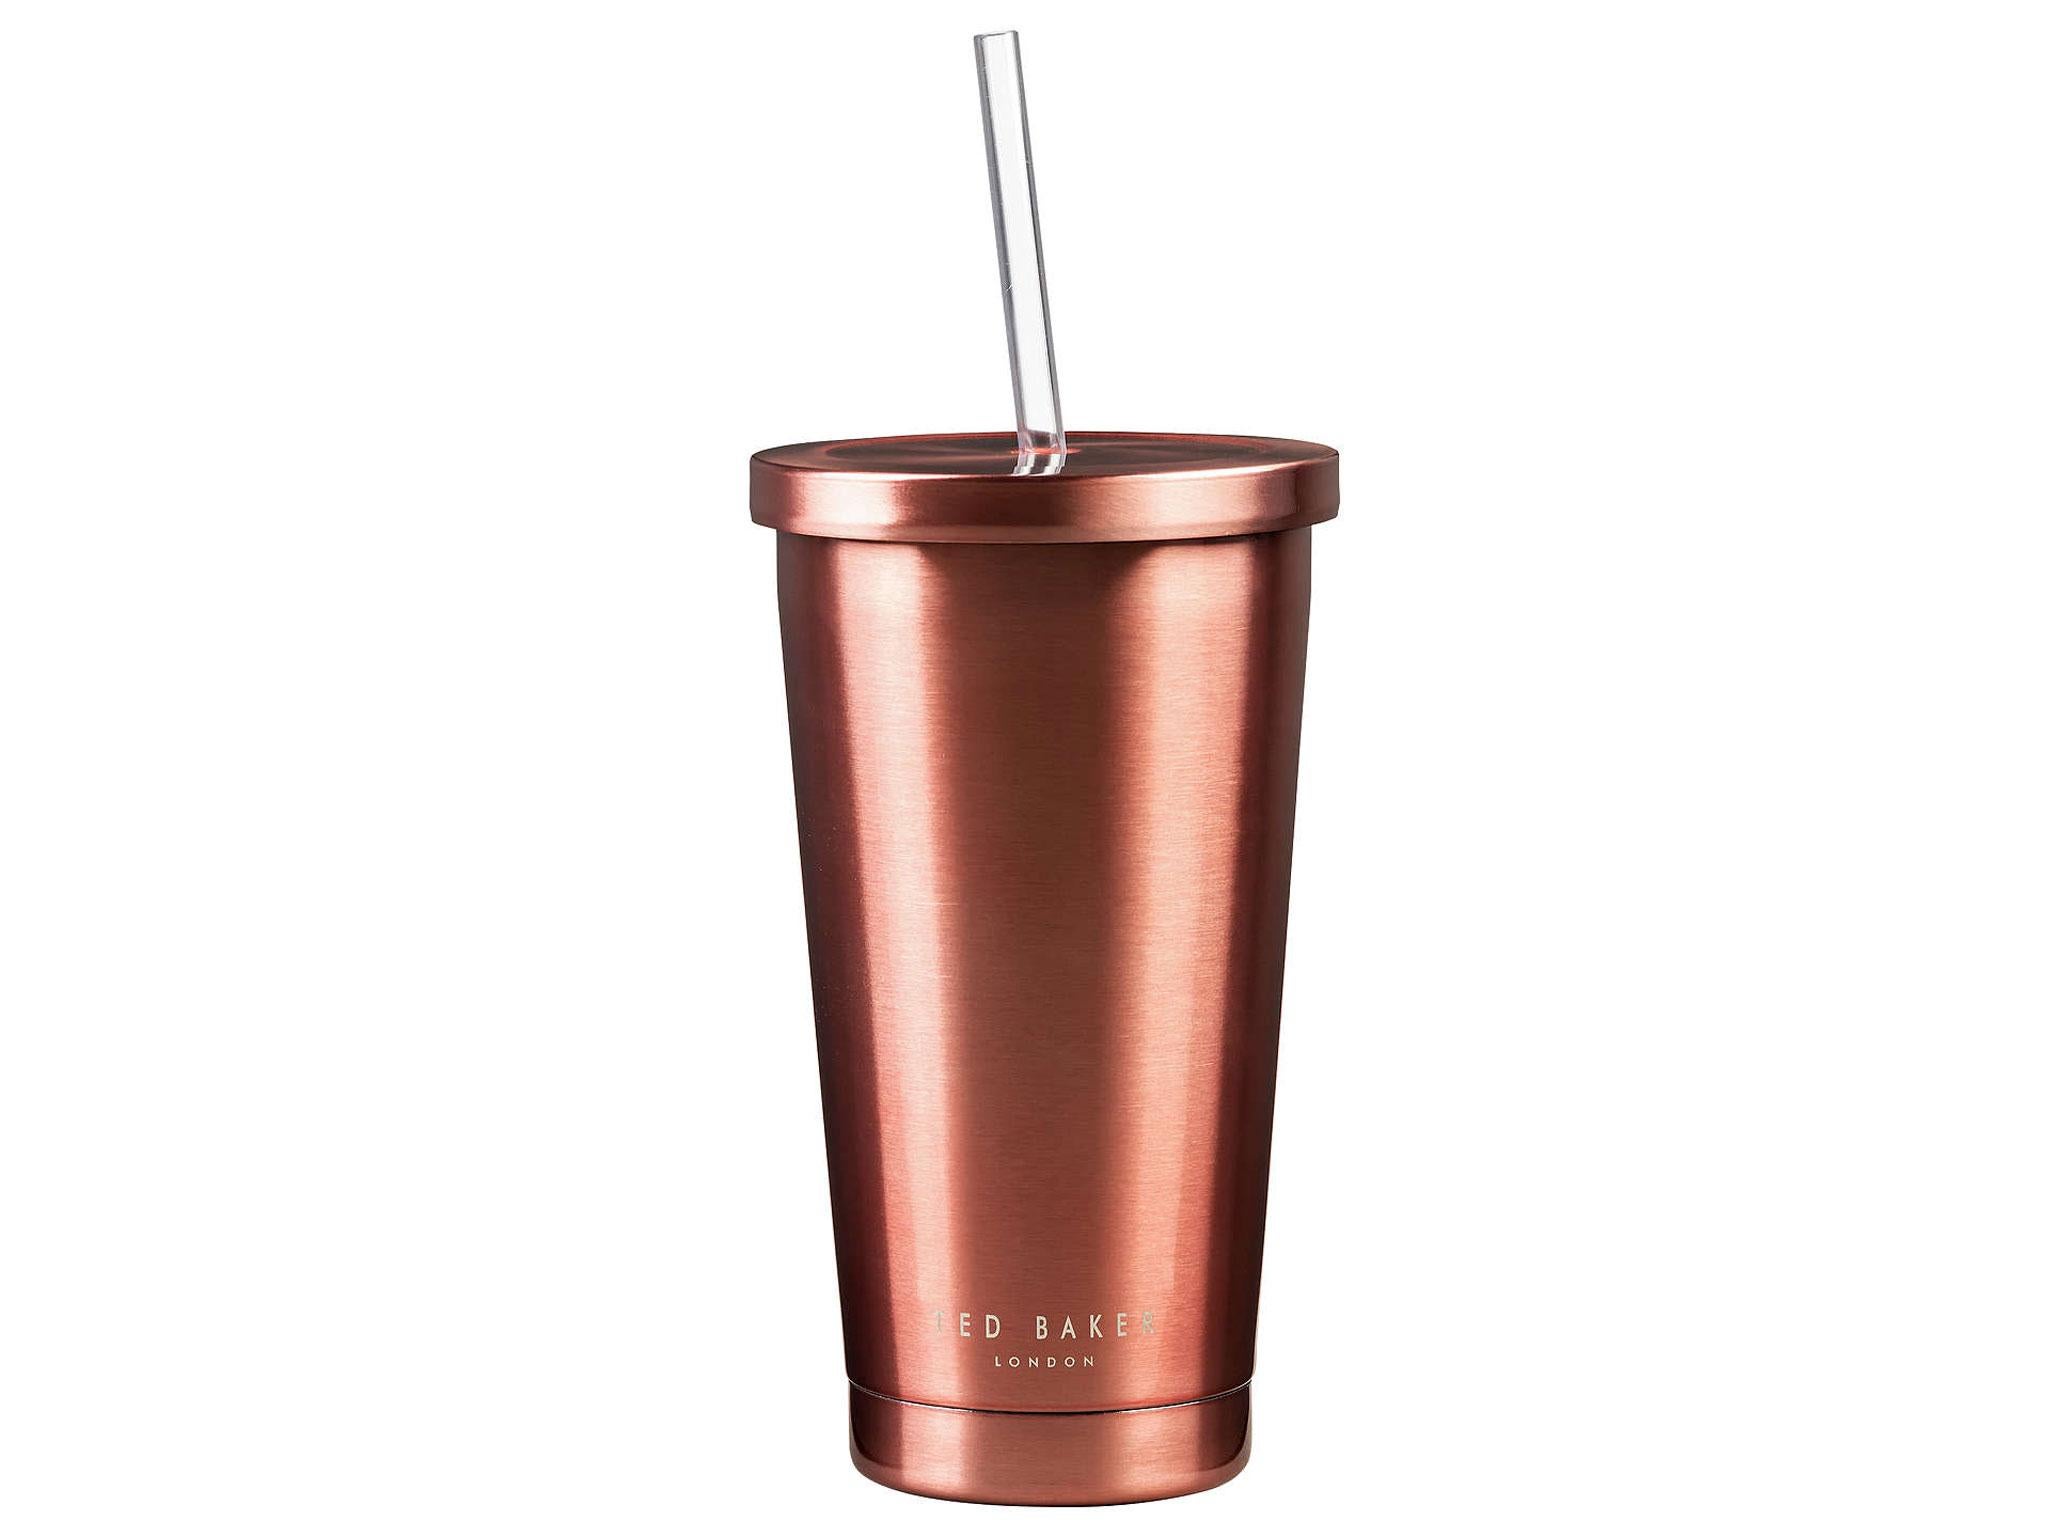 Ted Baker reusable smoothie cup with reusable sinless steel straw